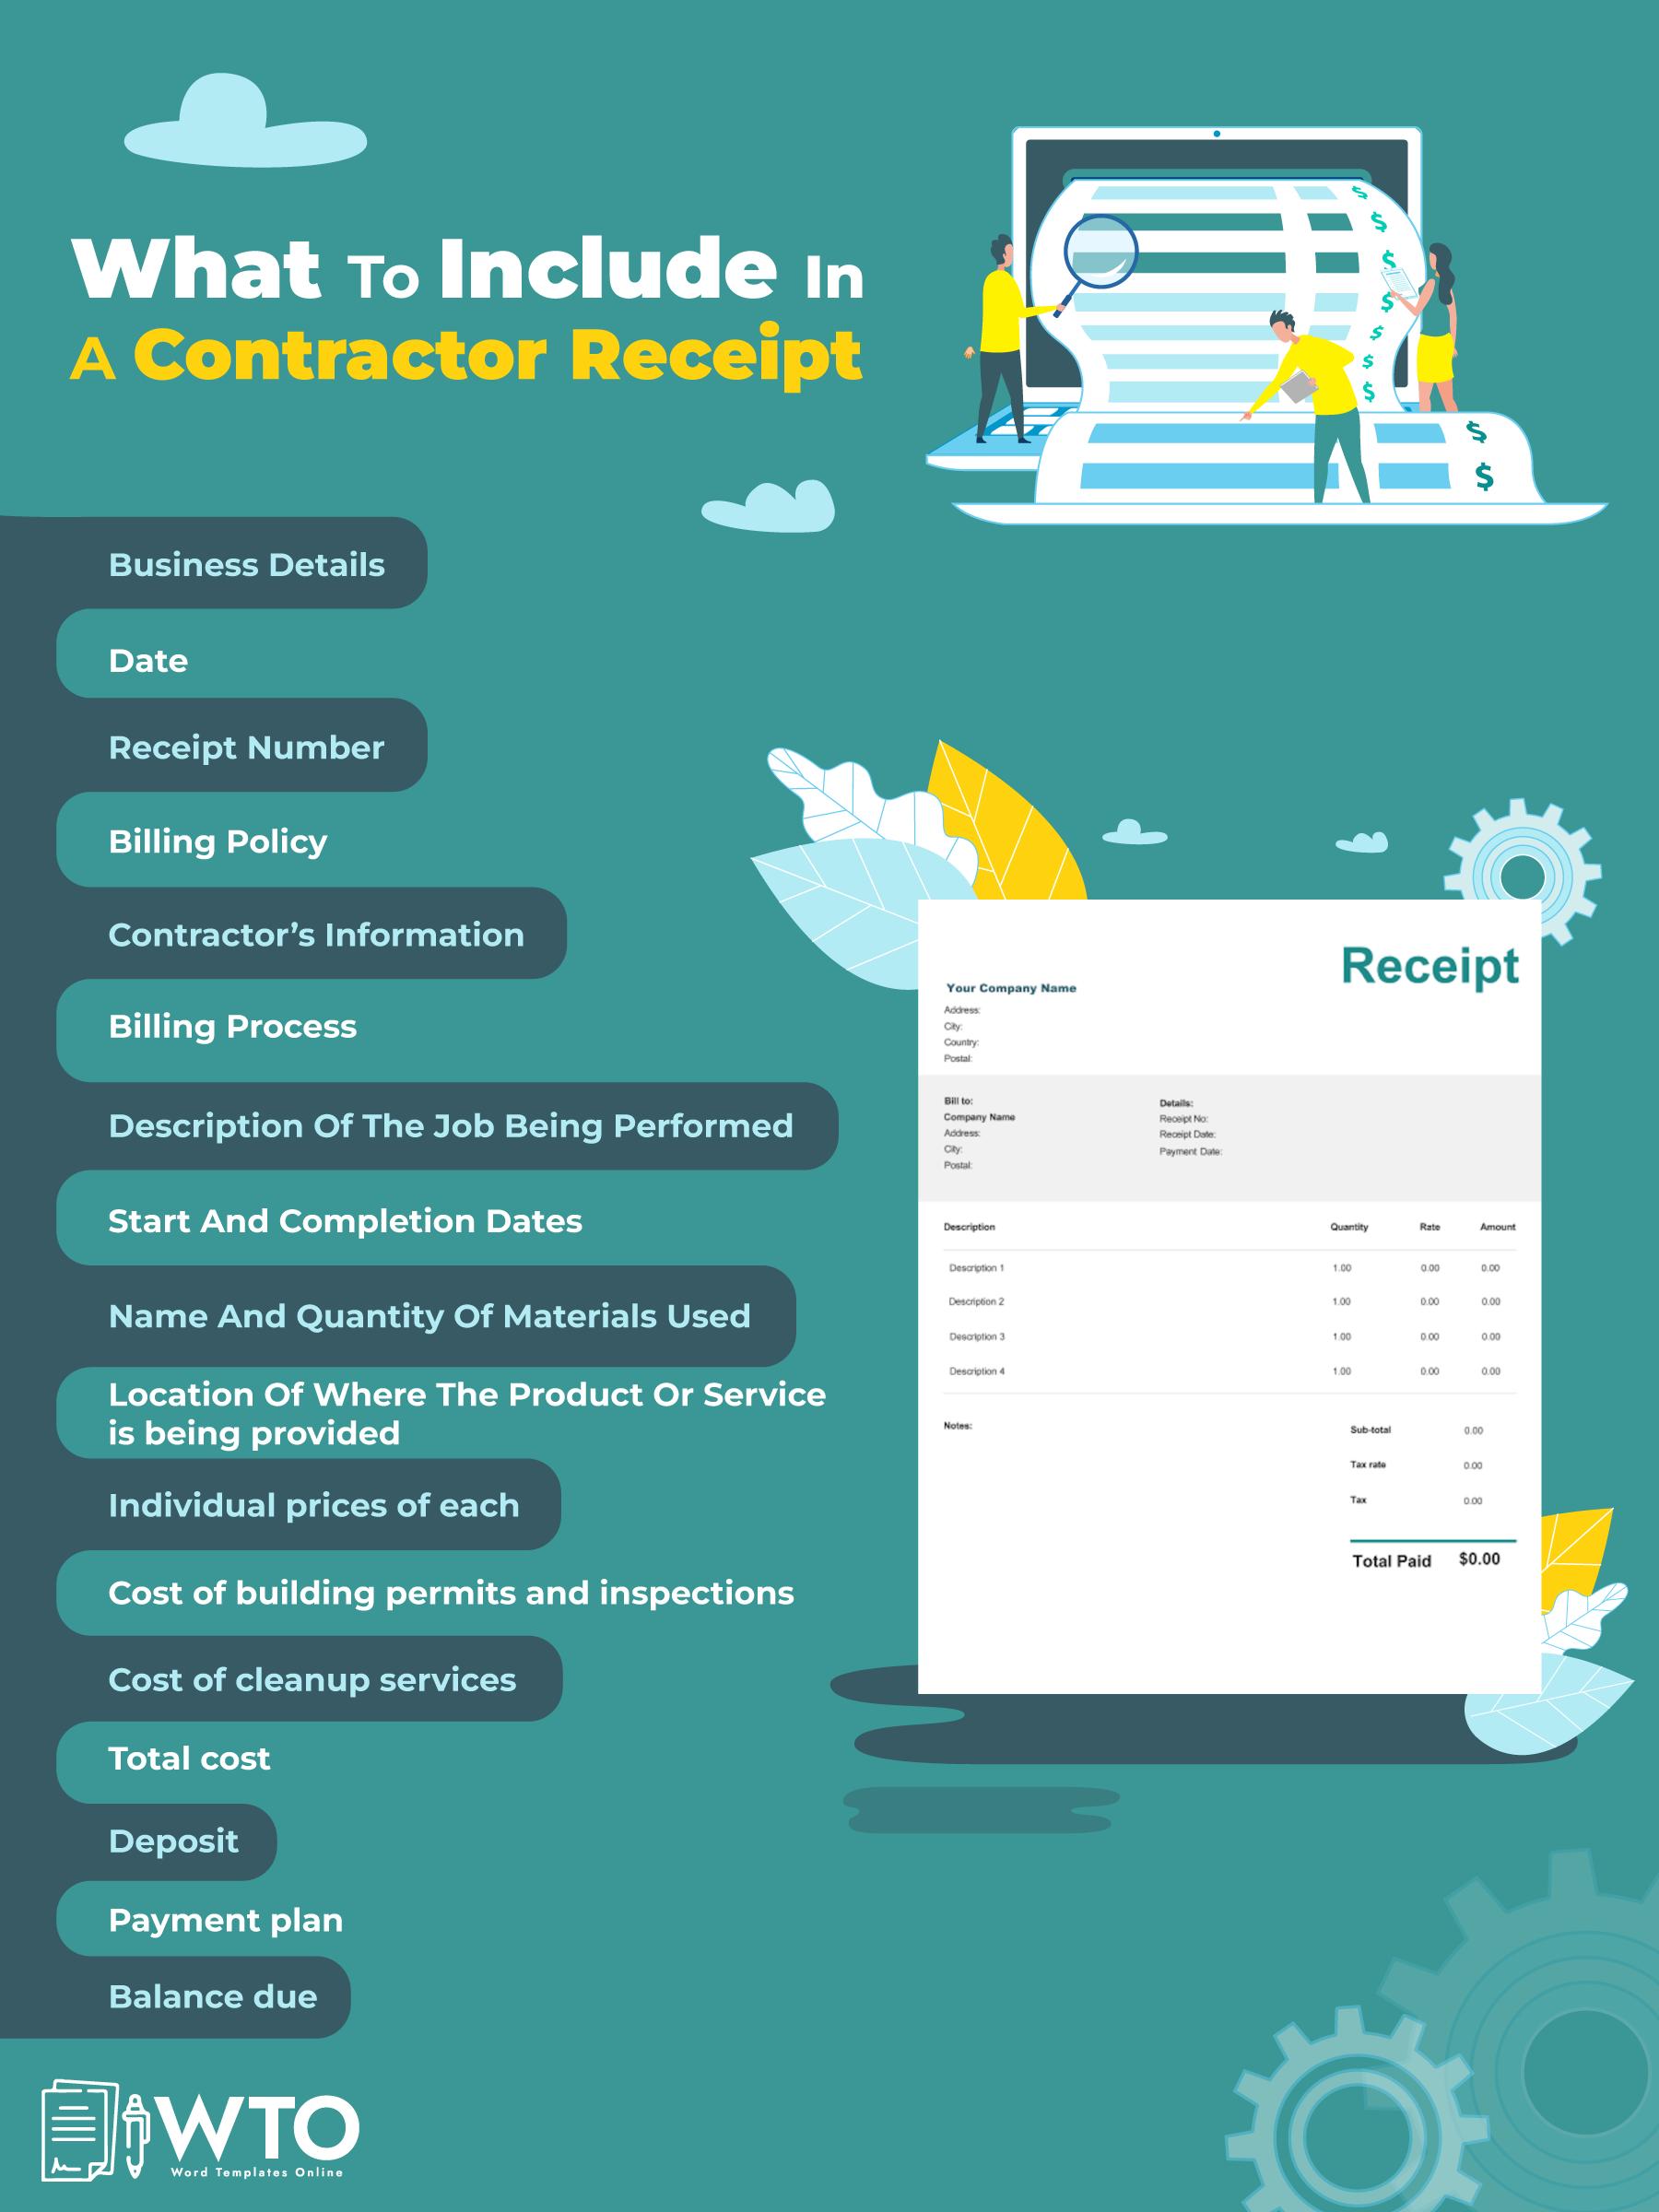 This infographic describes what to include in a contractor receipt.